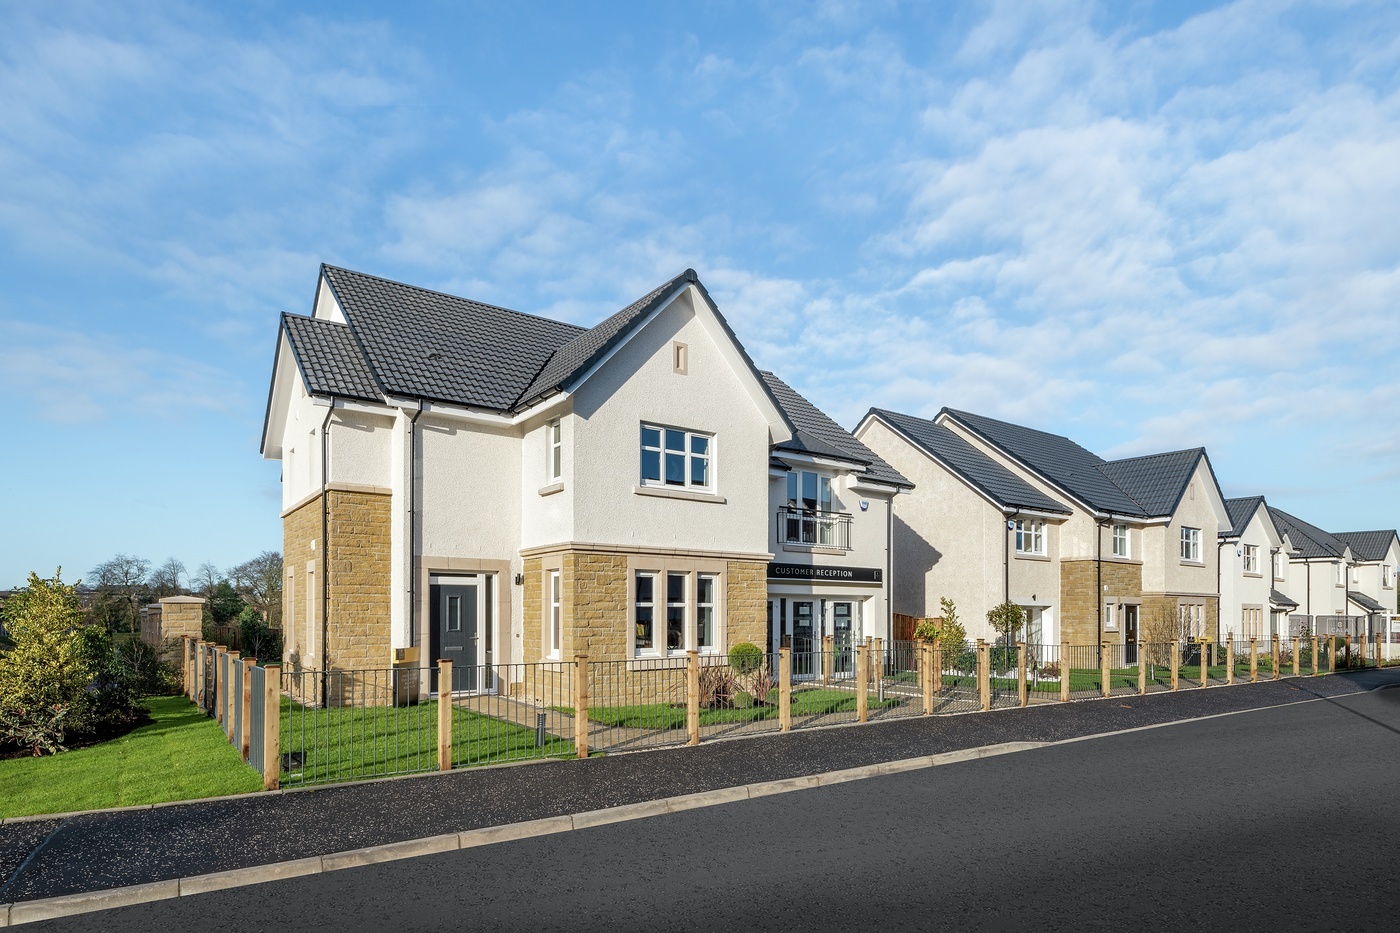 CALA submits plans for more than 250 homes at Fauldhead